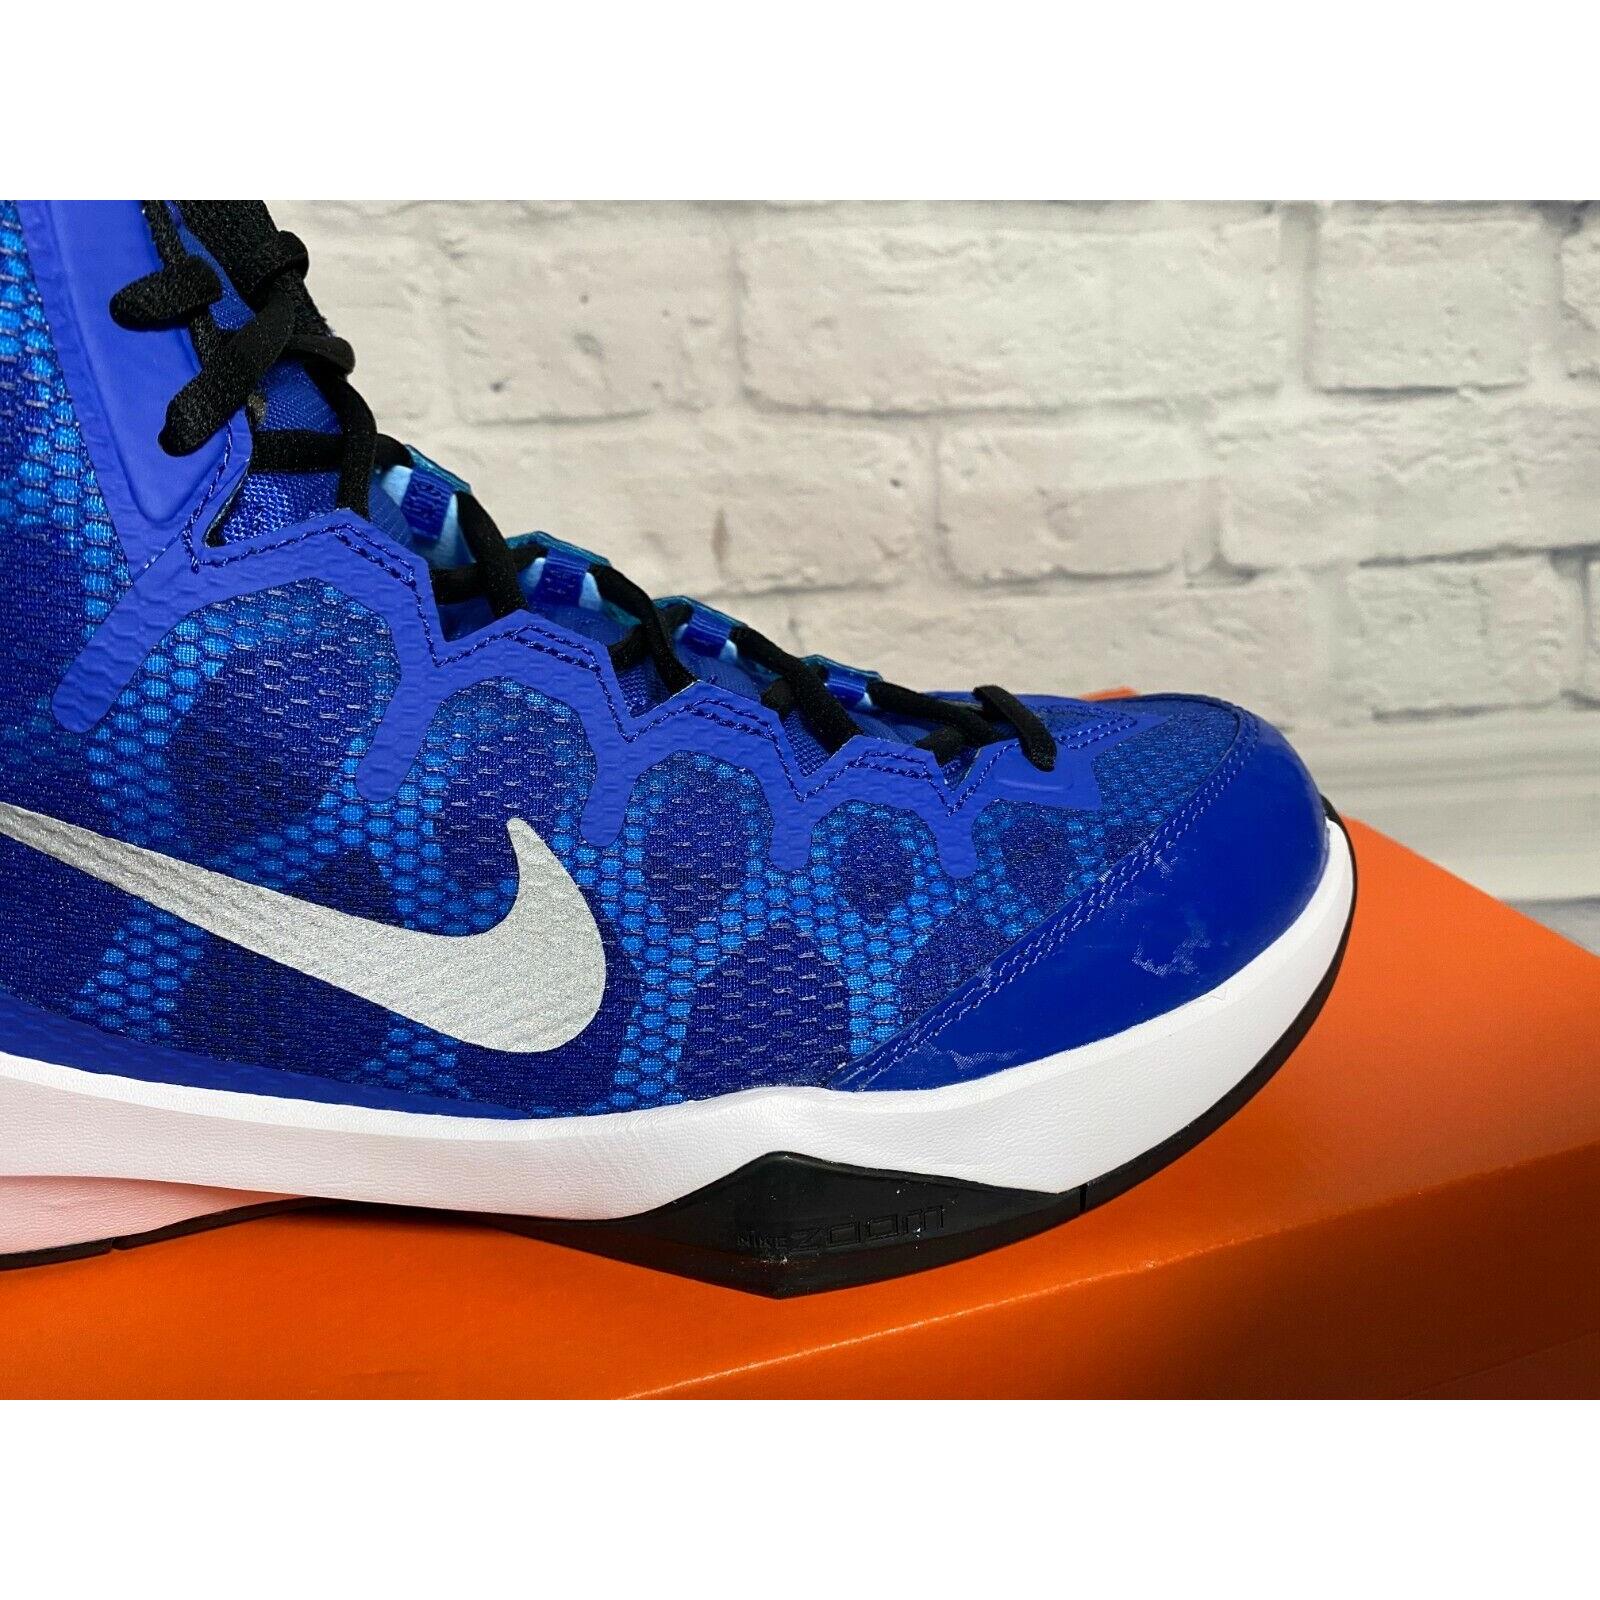 Nike shoes ZOOM WITHOUT DOUBT - BLUE 4